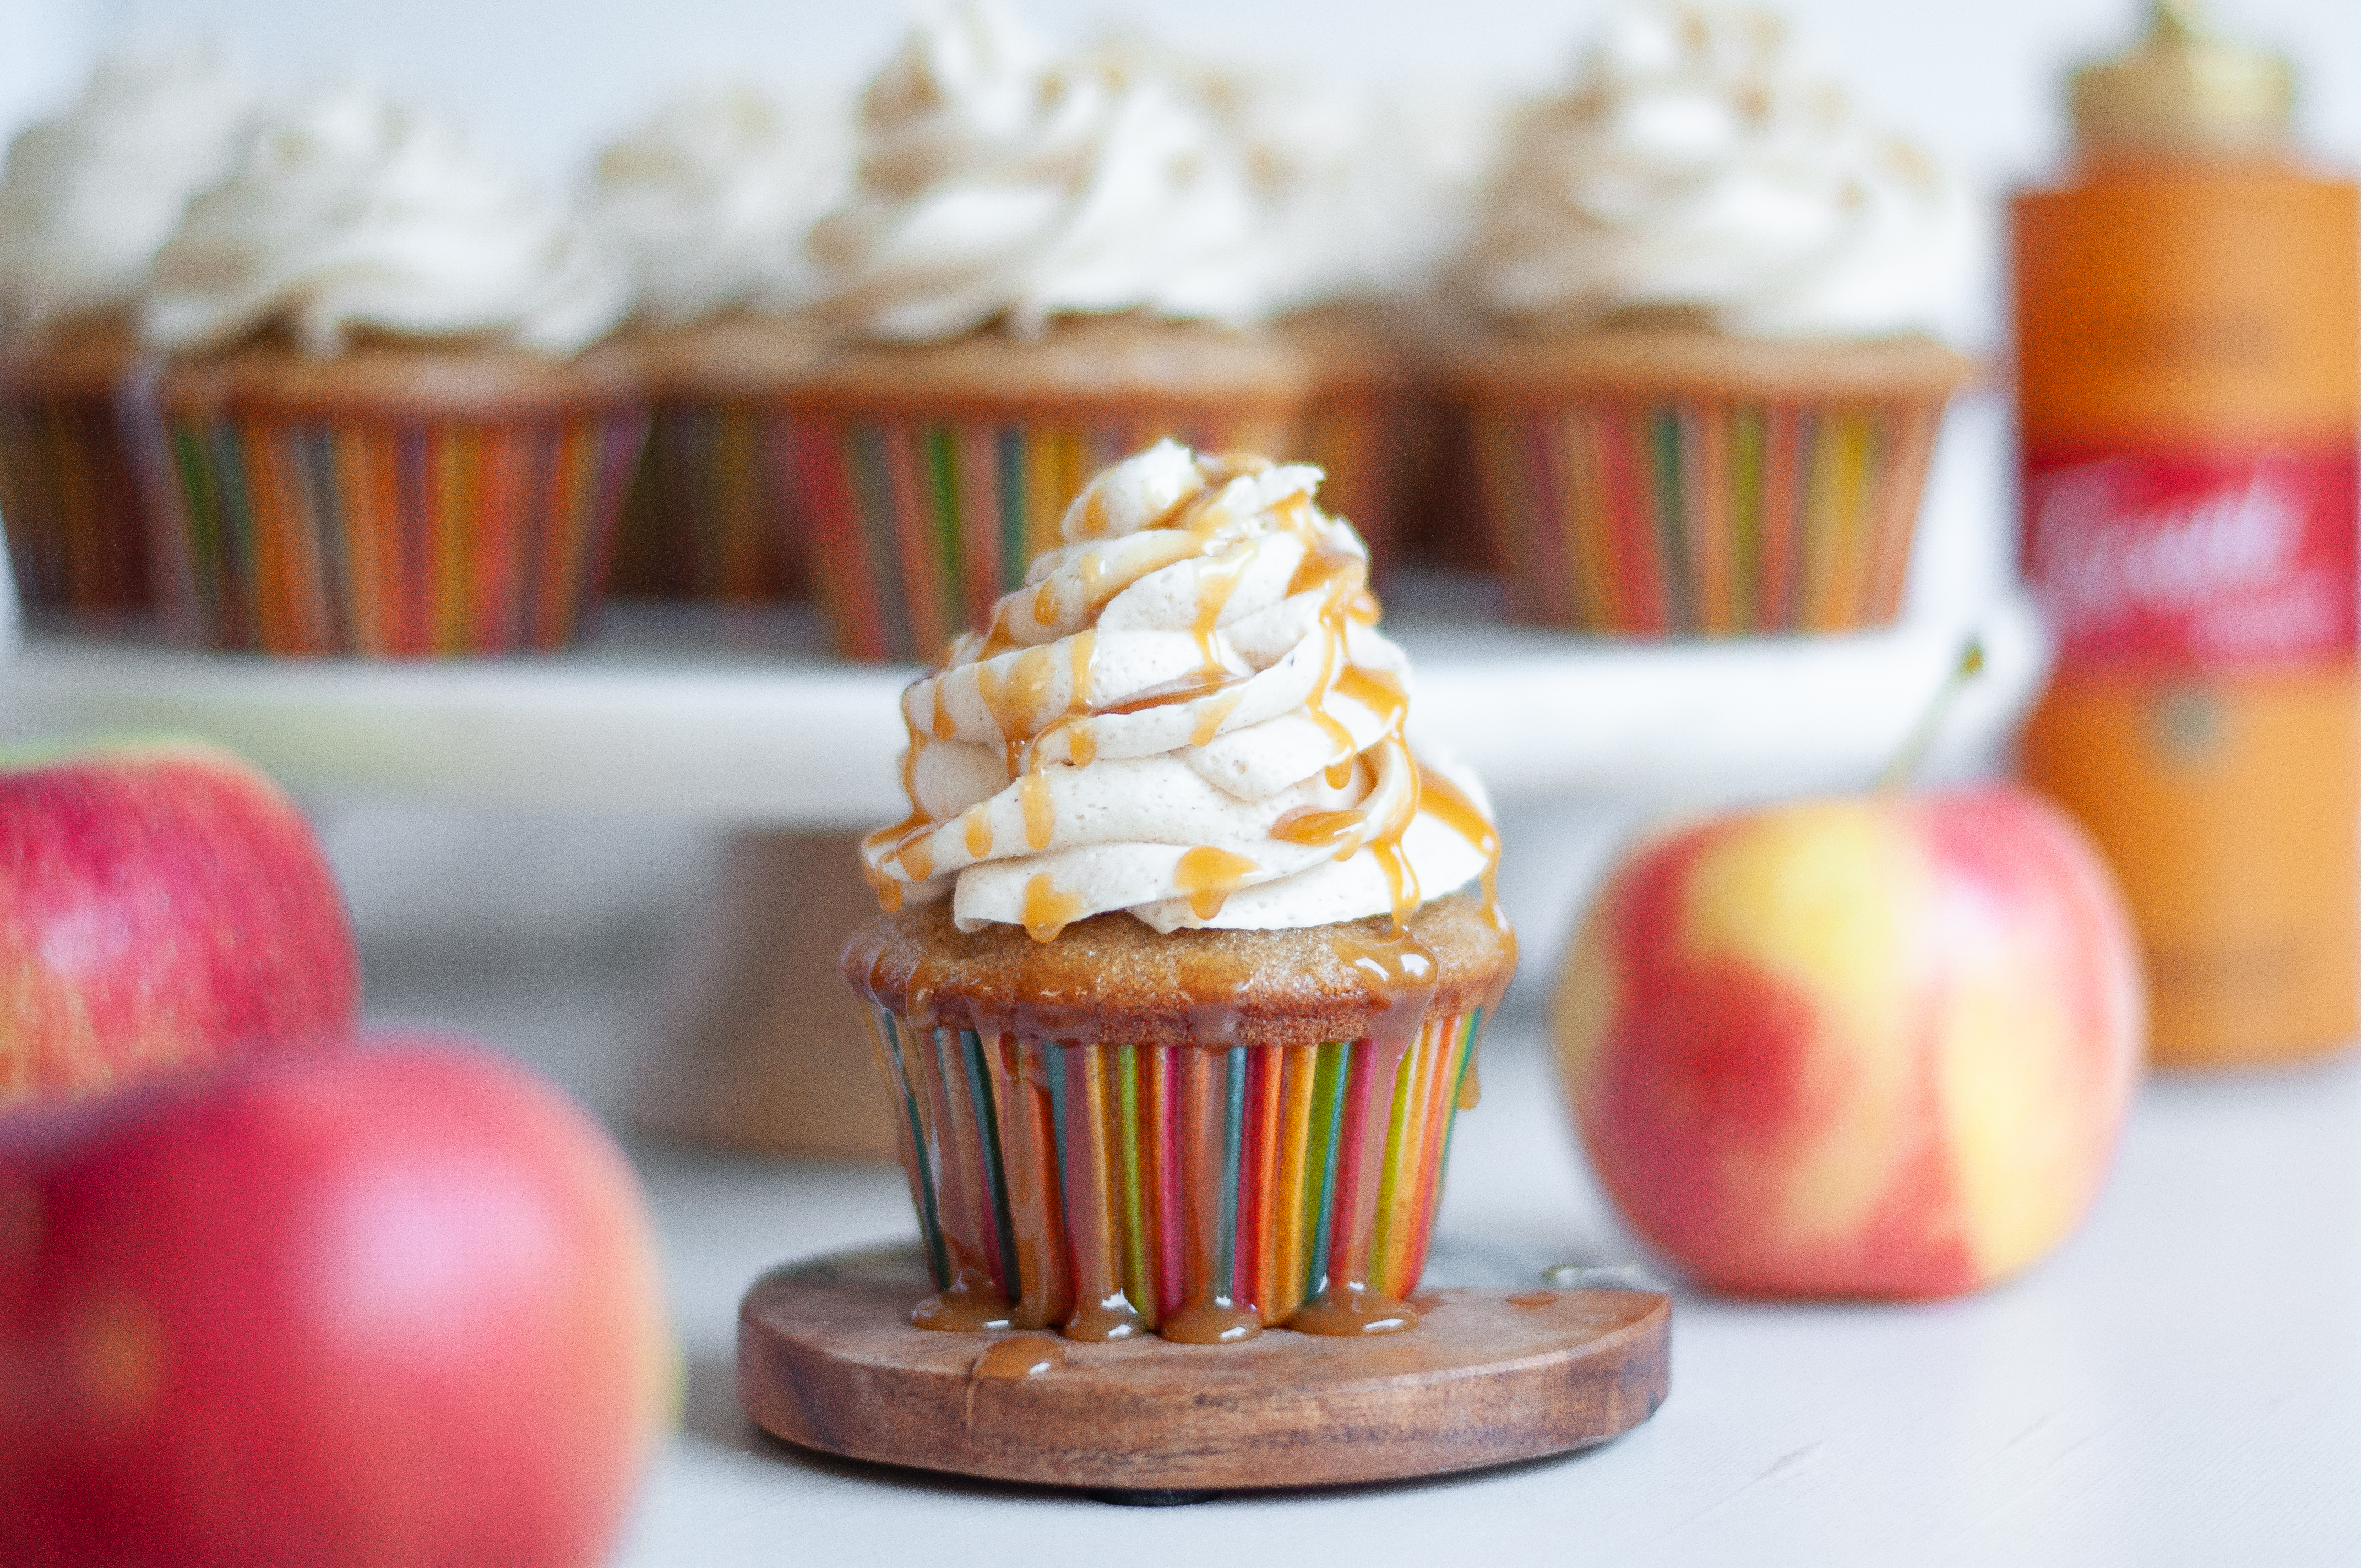 Close up of an apple spice cupcake with spiced buttercream frosting and caramel drizzle. Behind the cupcake in focus is a cake stand covered with more spiced cupcakes and a jar of caramel syrup. The apple cupcake is also surrounded by apples.